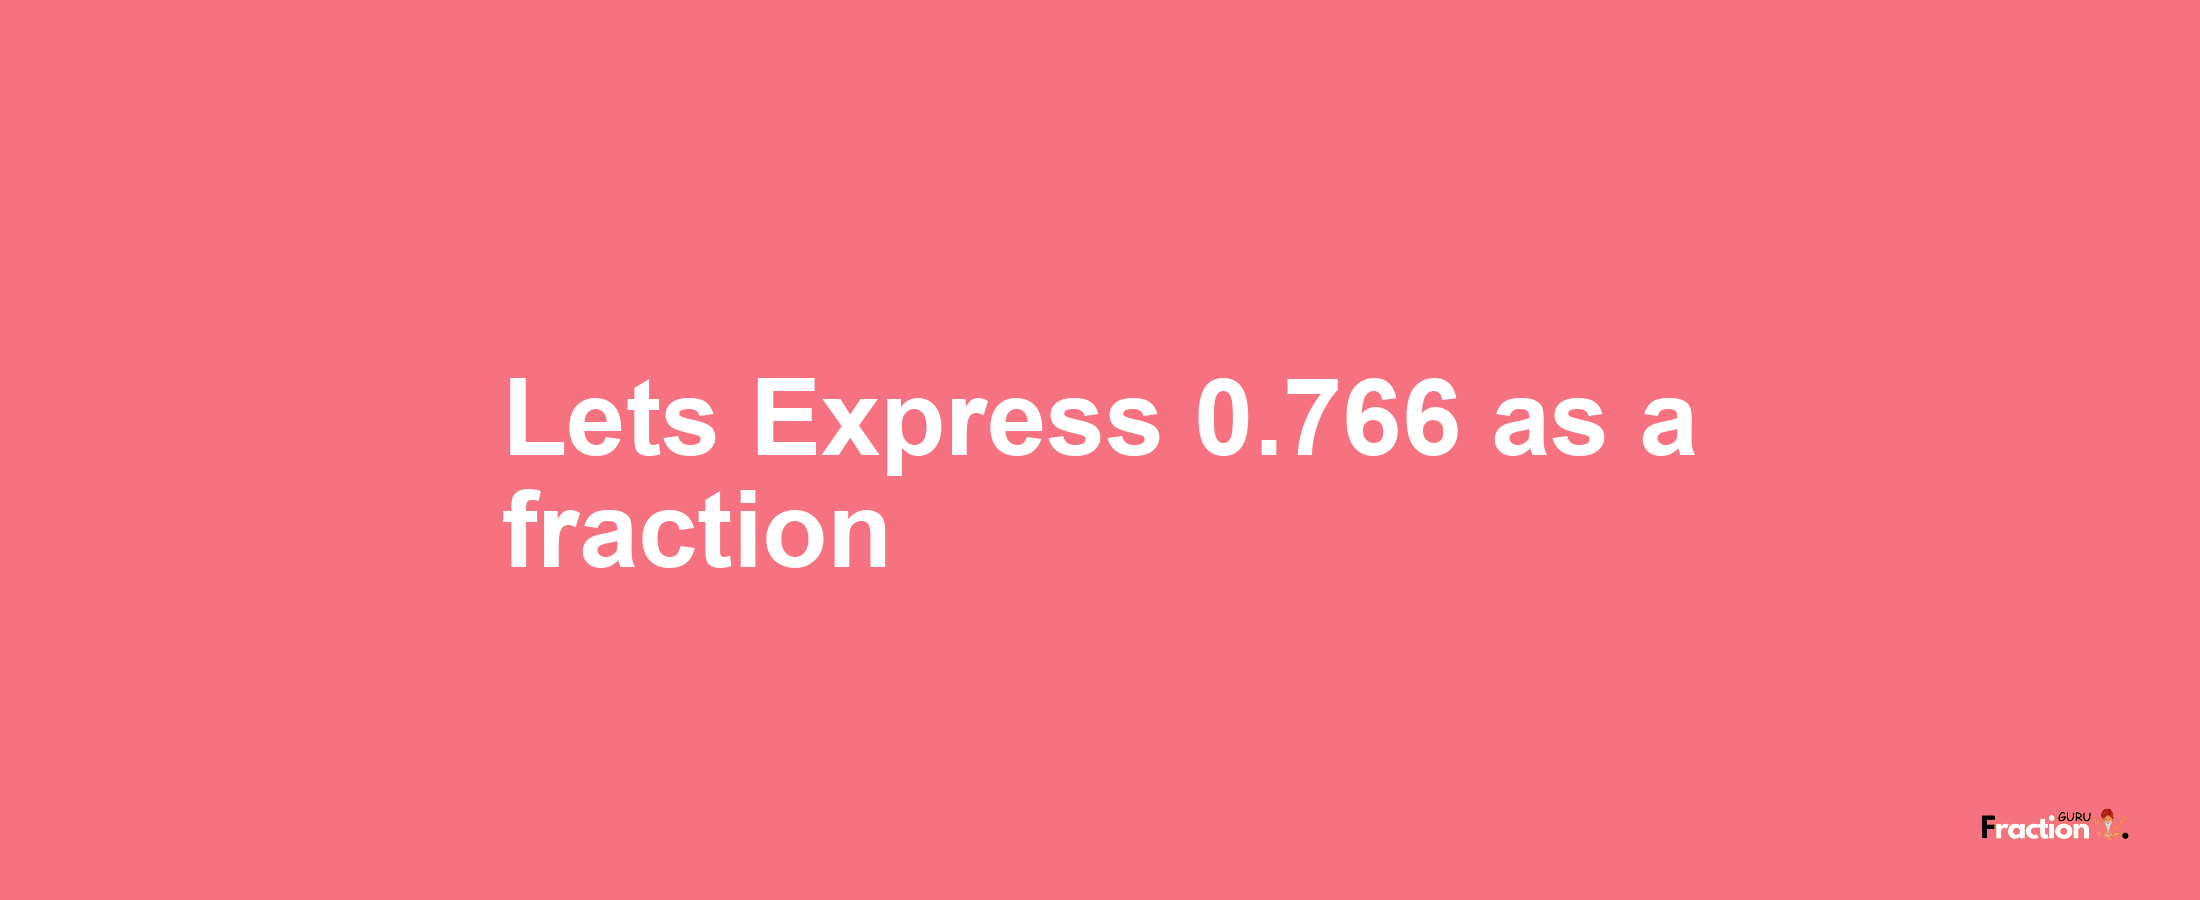 Lets Express 0.766 as afraction